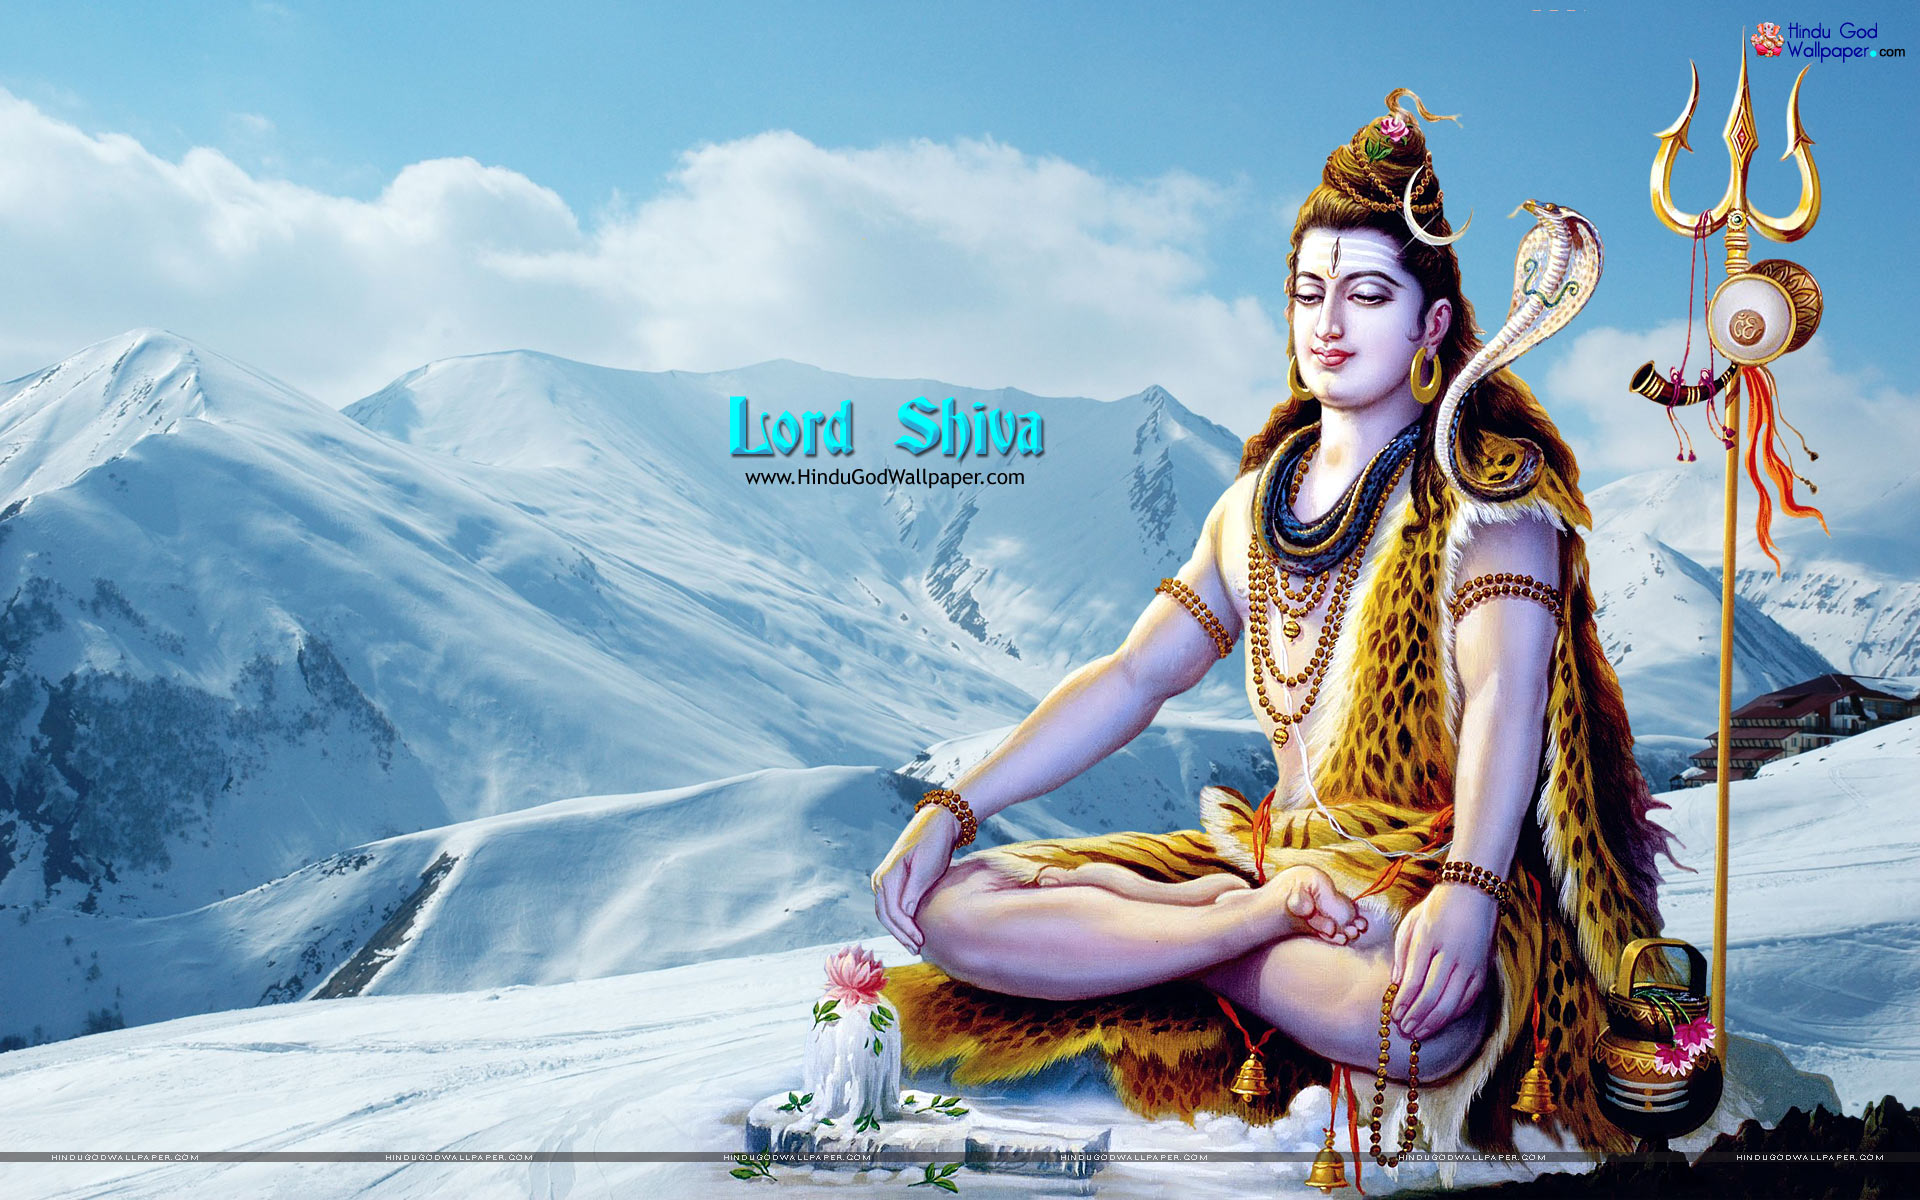 Image of god shiva and wallpaper Download